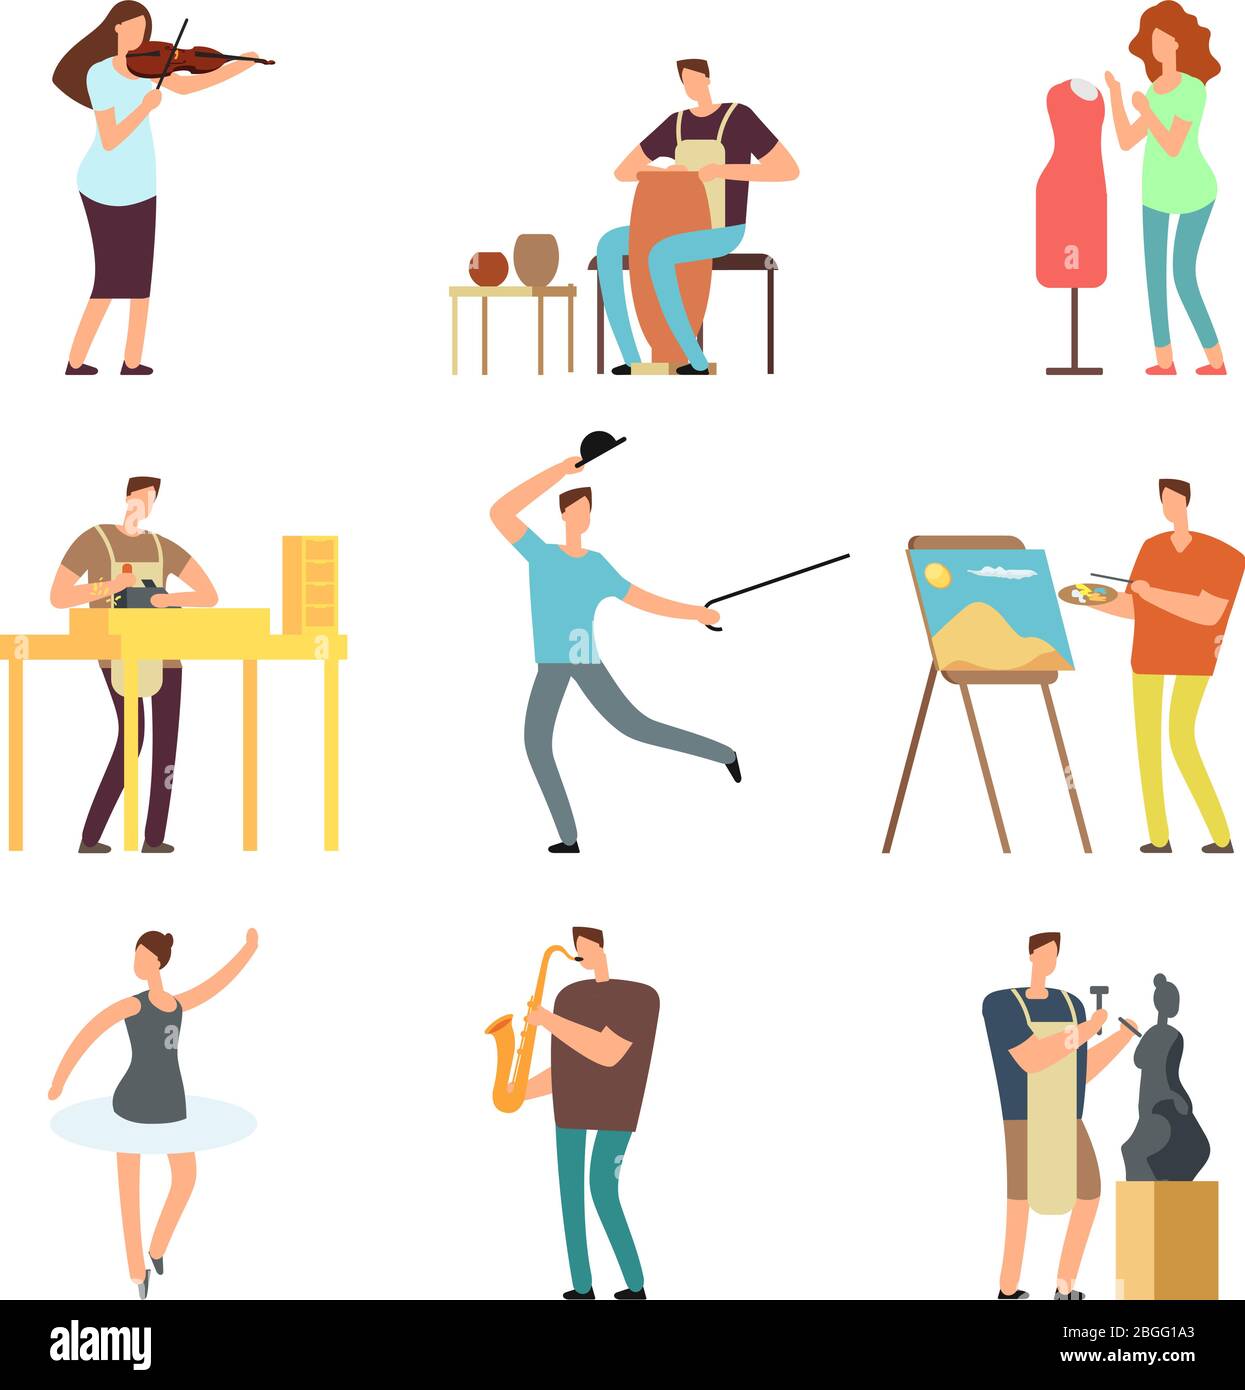 Happy people of art and music. Cartoon artists and musicians vector isolated characters in creative artistic hobbies. Art character musician and fashion designer, carpentry and composer illustration Stock Vector